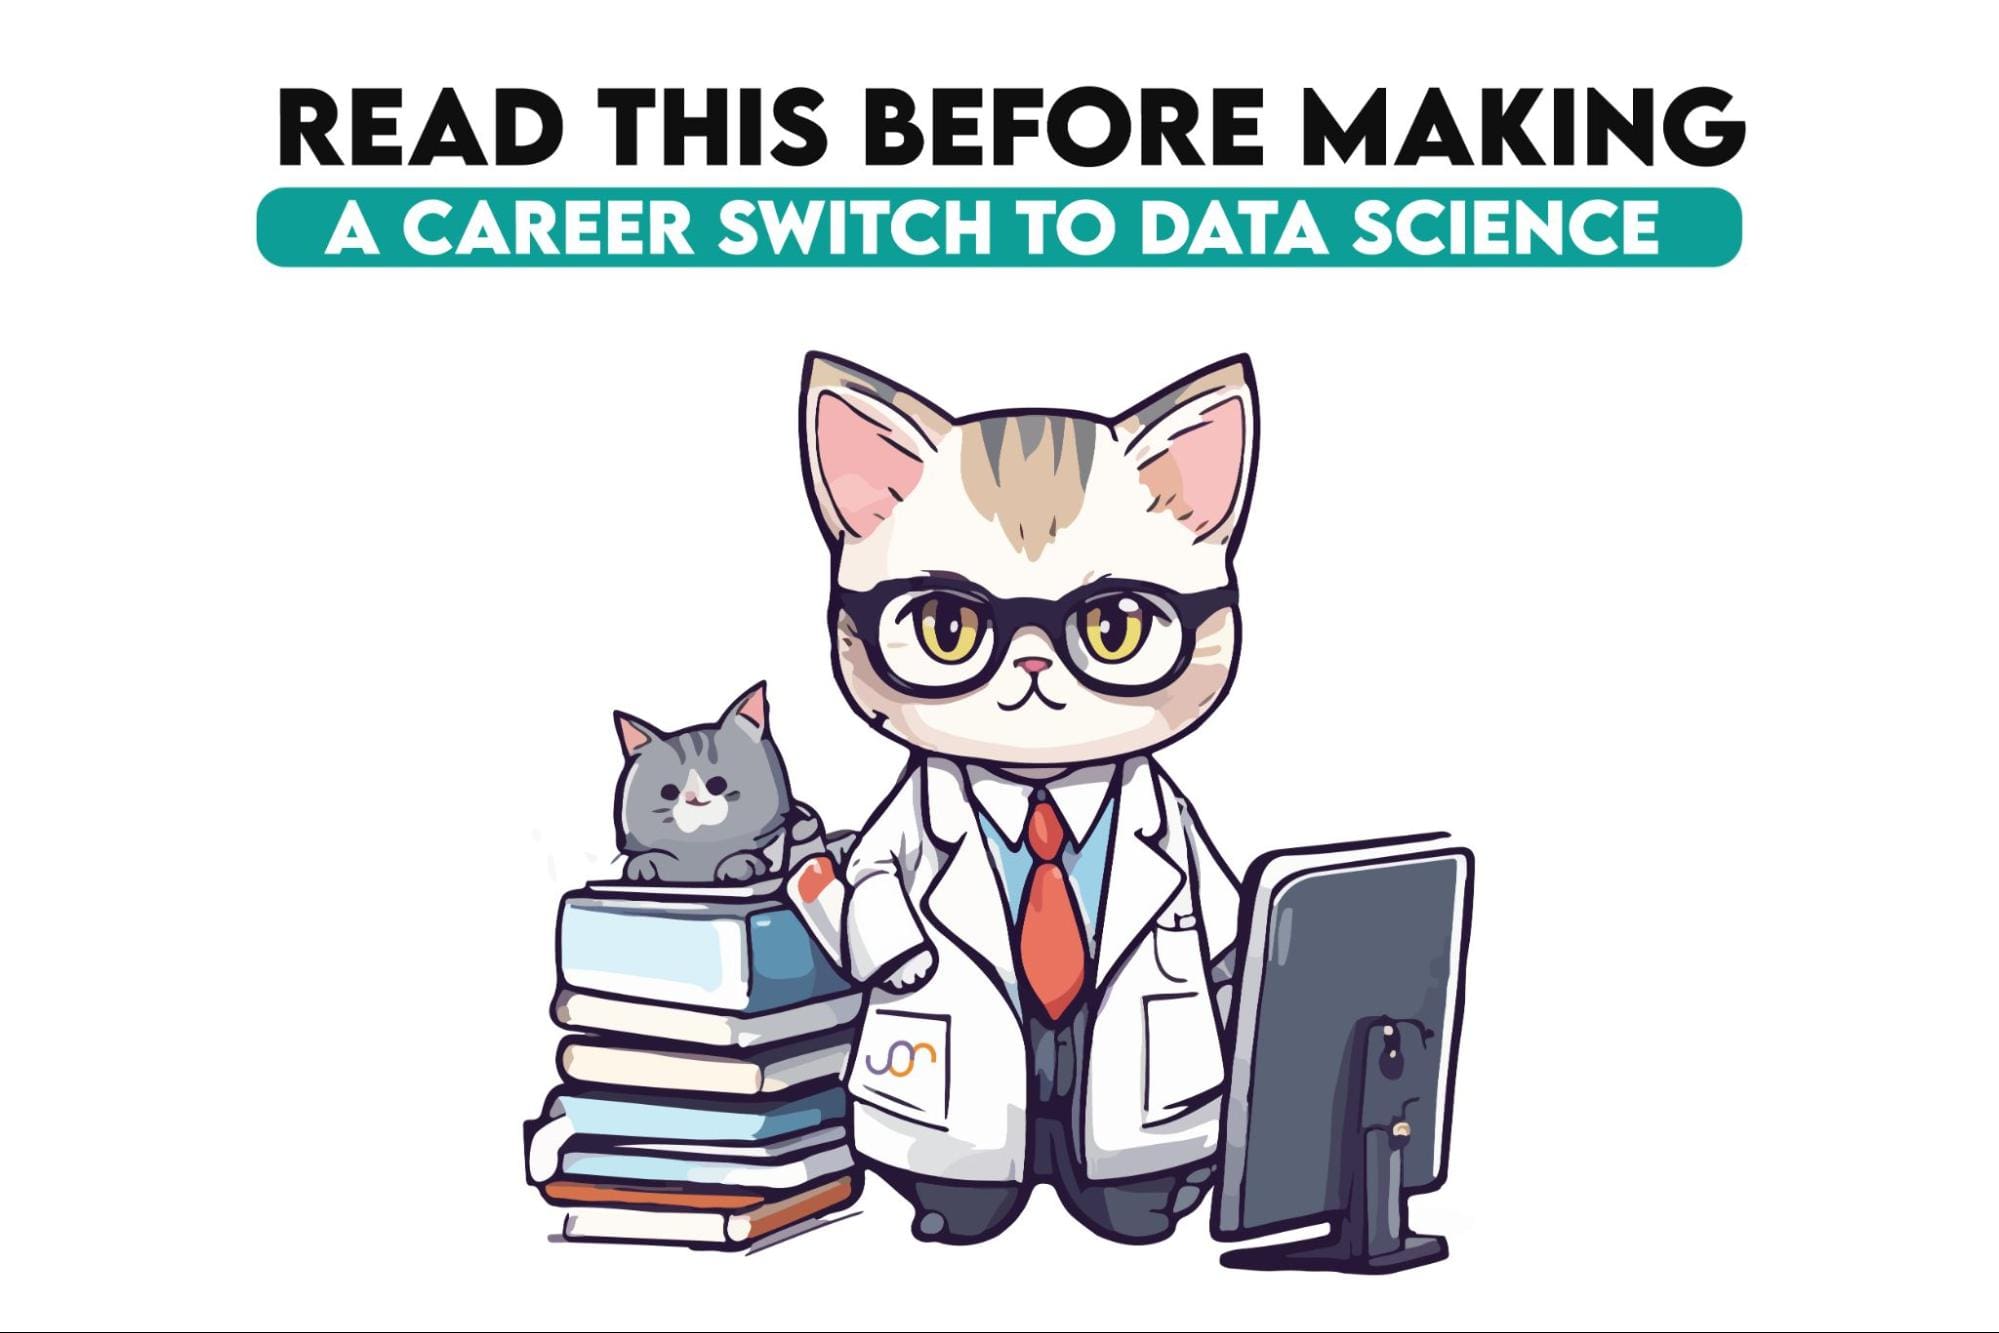 Read This Before Making a Career Switch to Data Science